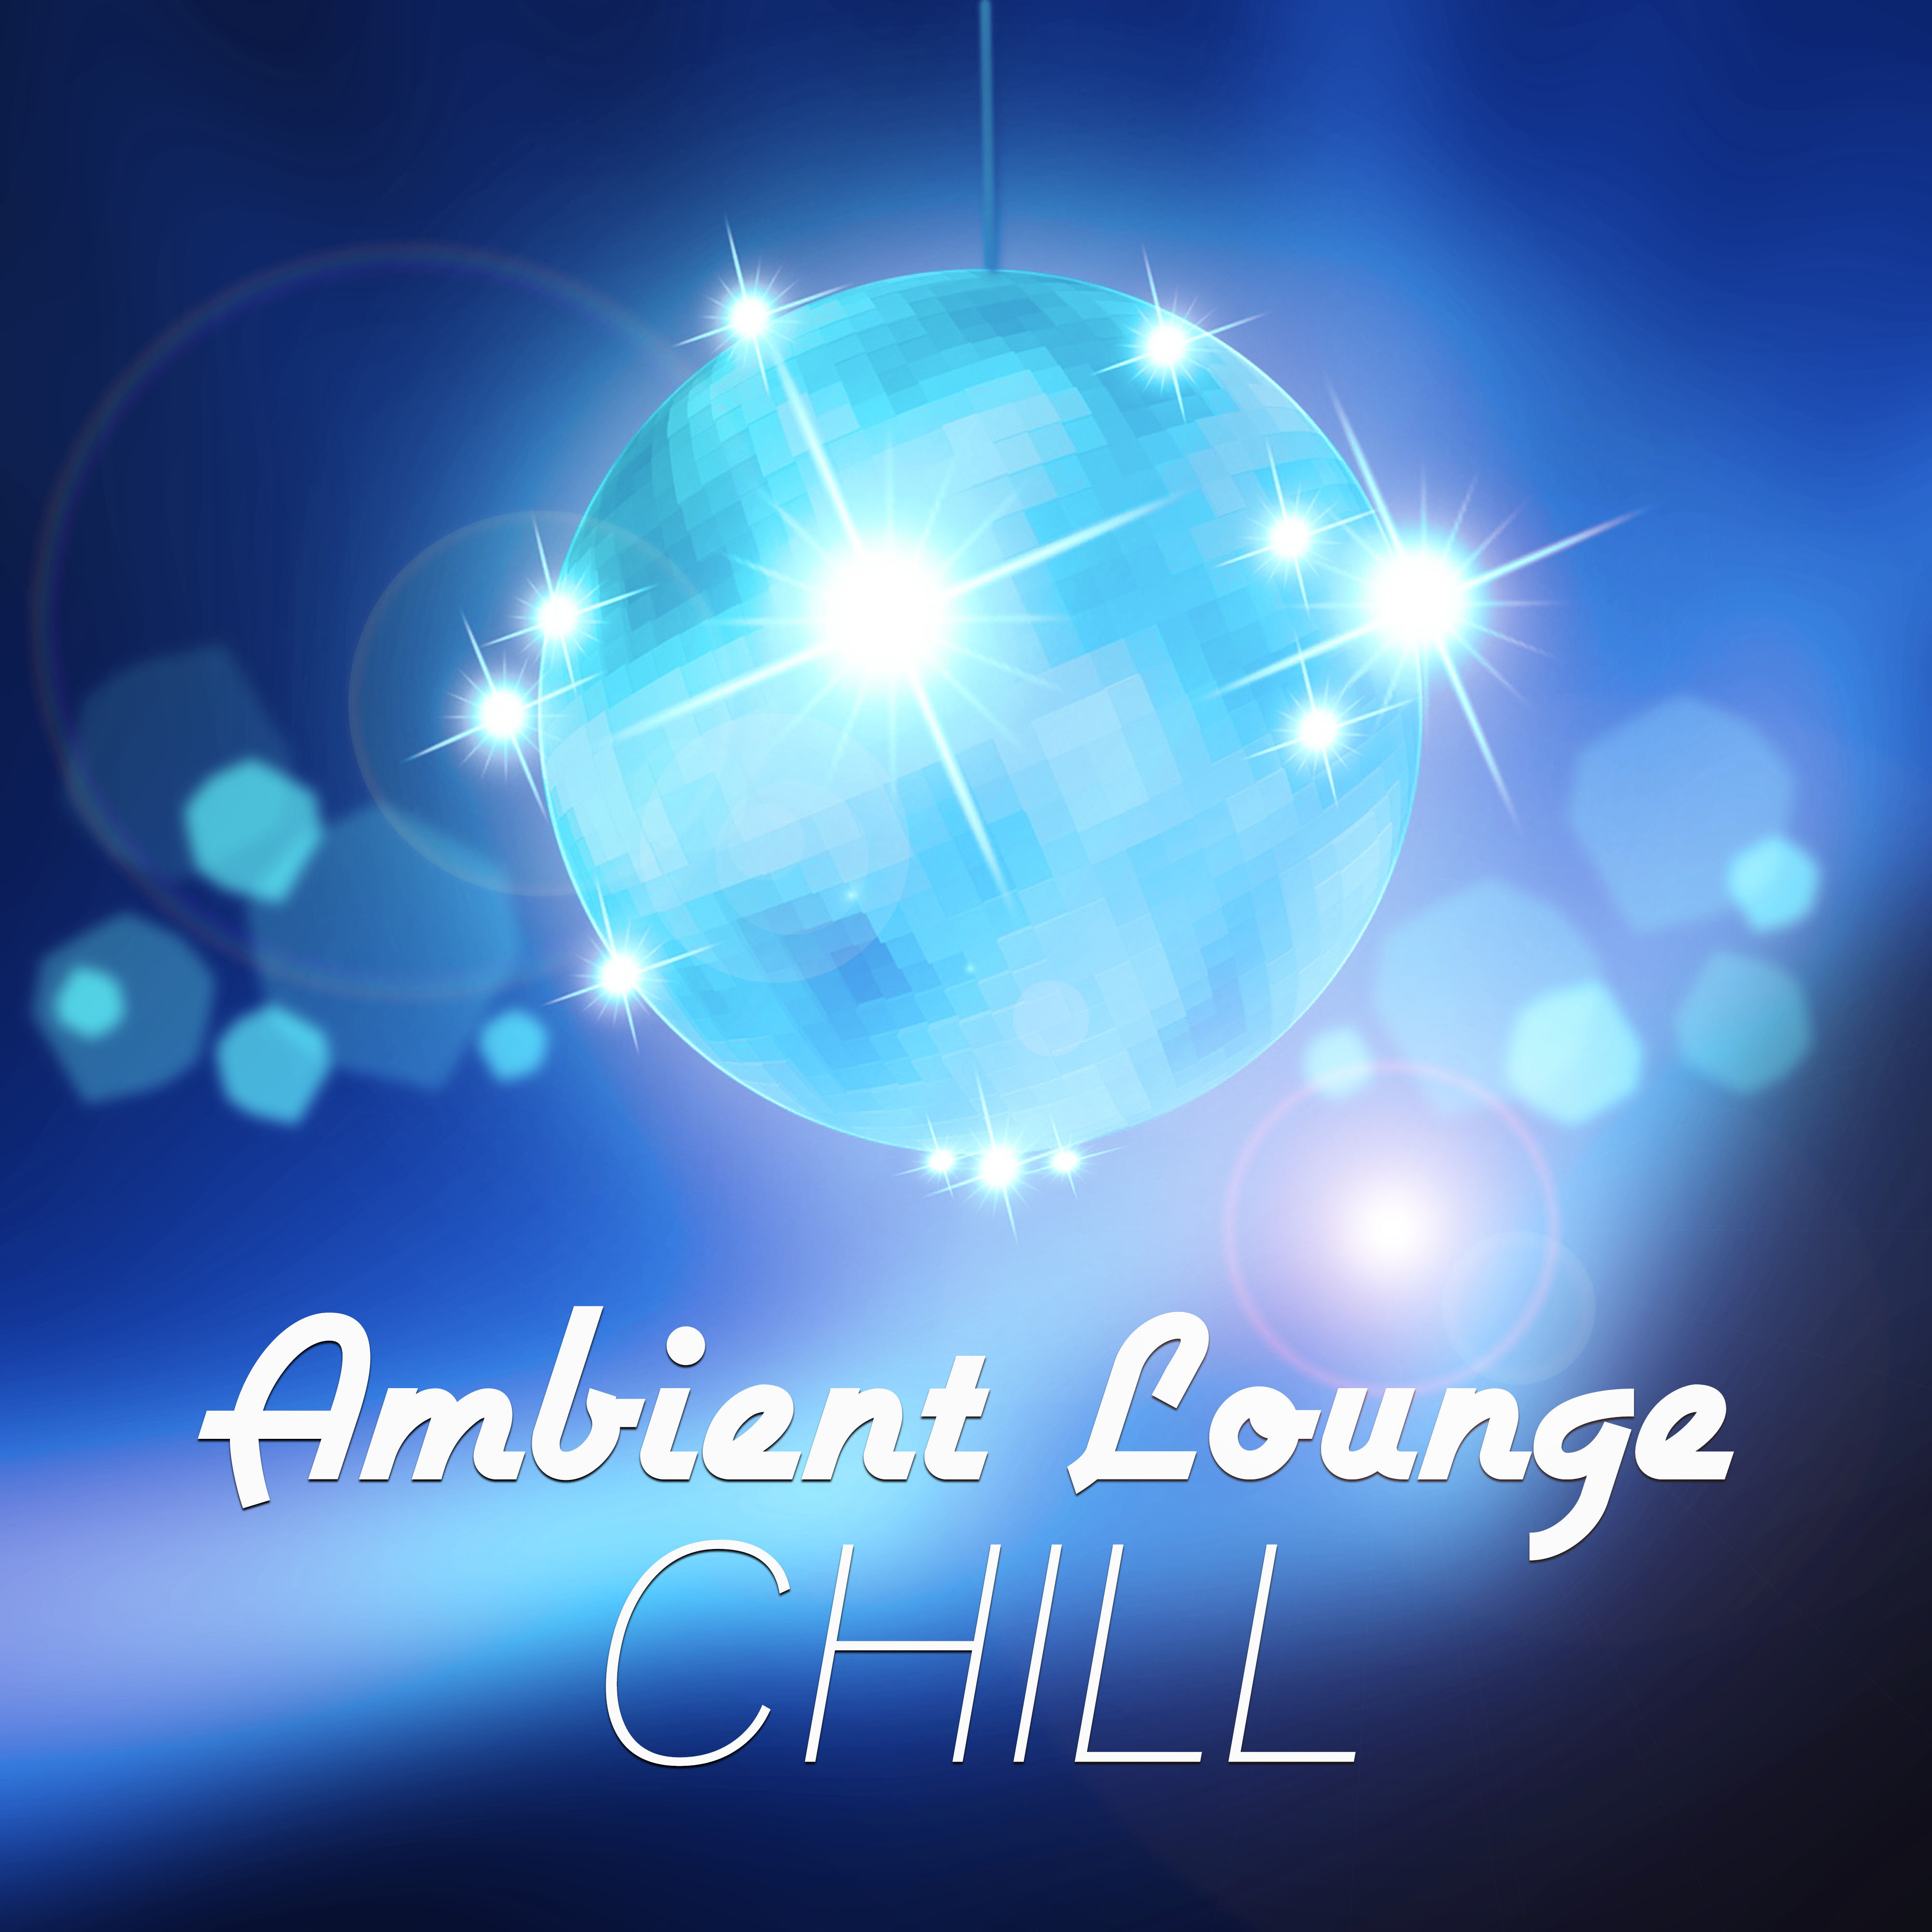 Ambient Lounge Chill - Happy Chill Out, Party Night Hits, Only Chill Out